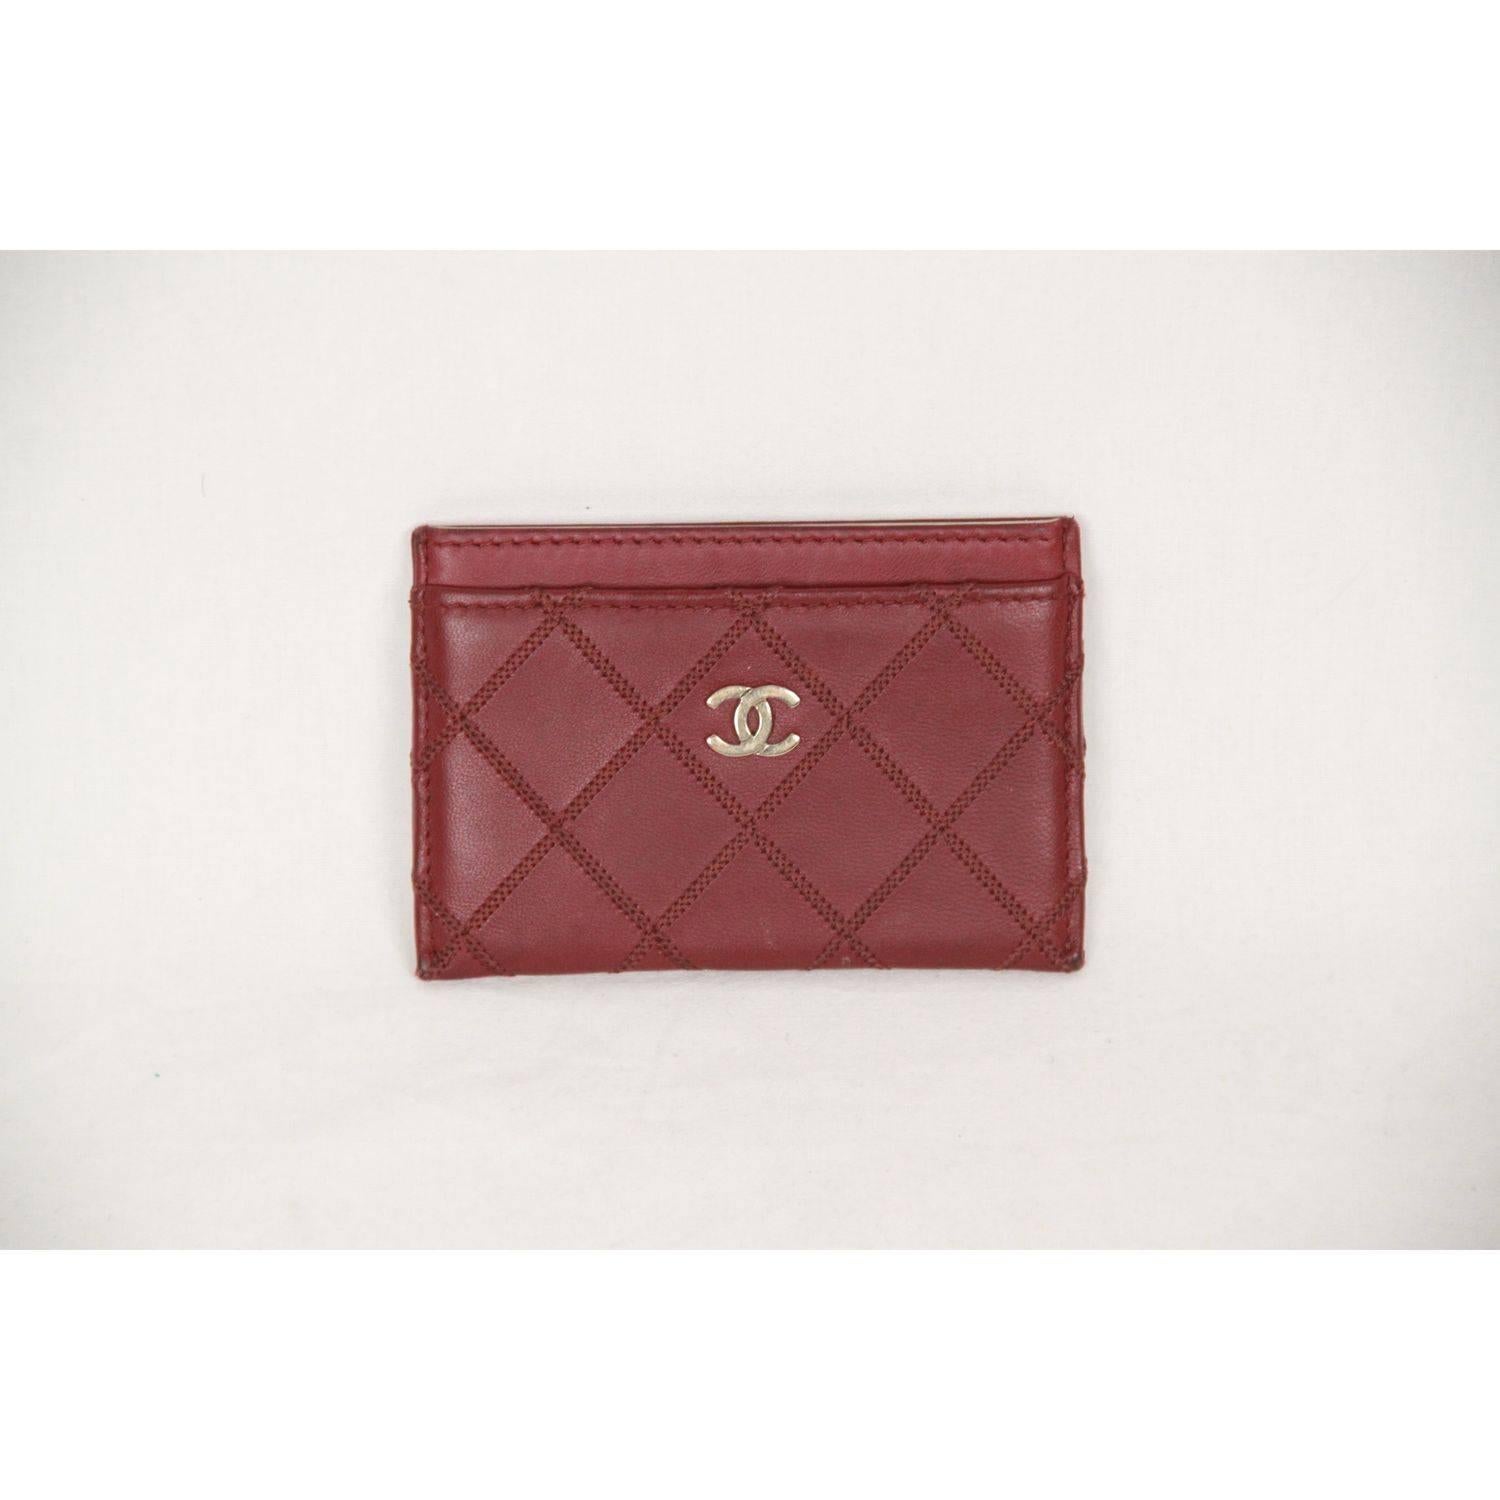 - CHANEL Quilted Credit card holder
- Burgundy leather 
- Iconic CHANEL quilt stitching
- Gold metal CC - CHANEL logo on the front
- Fabric interior
- 4 sections
- Measurements (HxLxD) 3 x 4.25  inches - 7,6 x 10,8 cm

Logos / Tags: 'CHANEL CC'